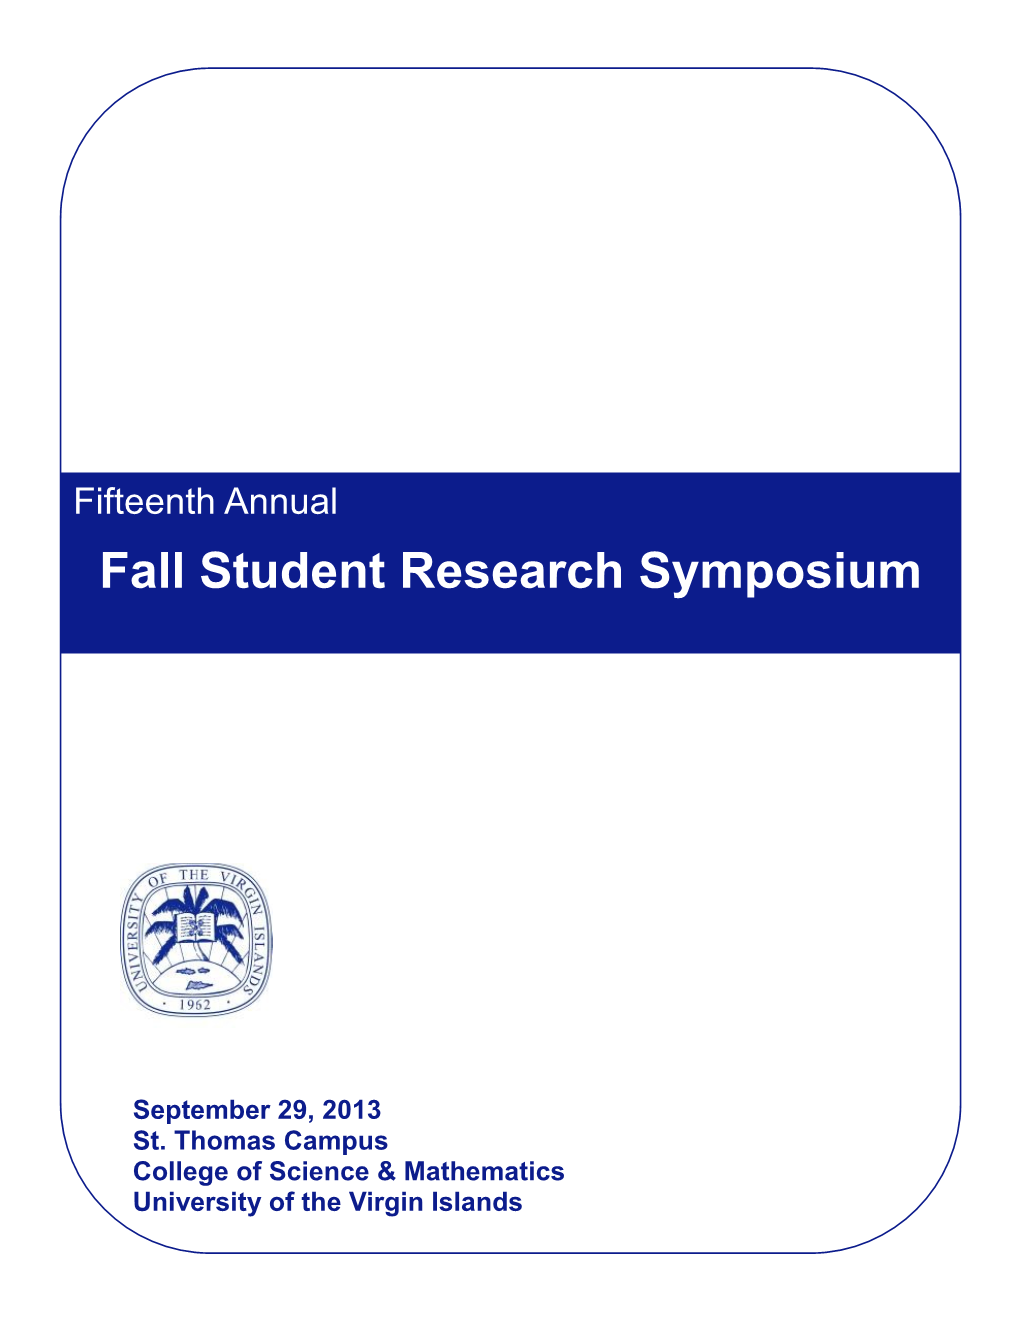 Fall Student Research Symposium